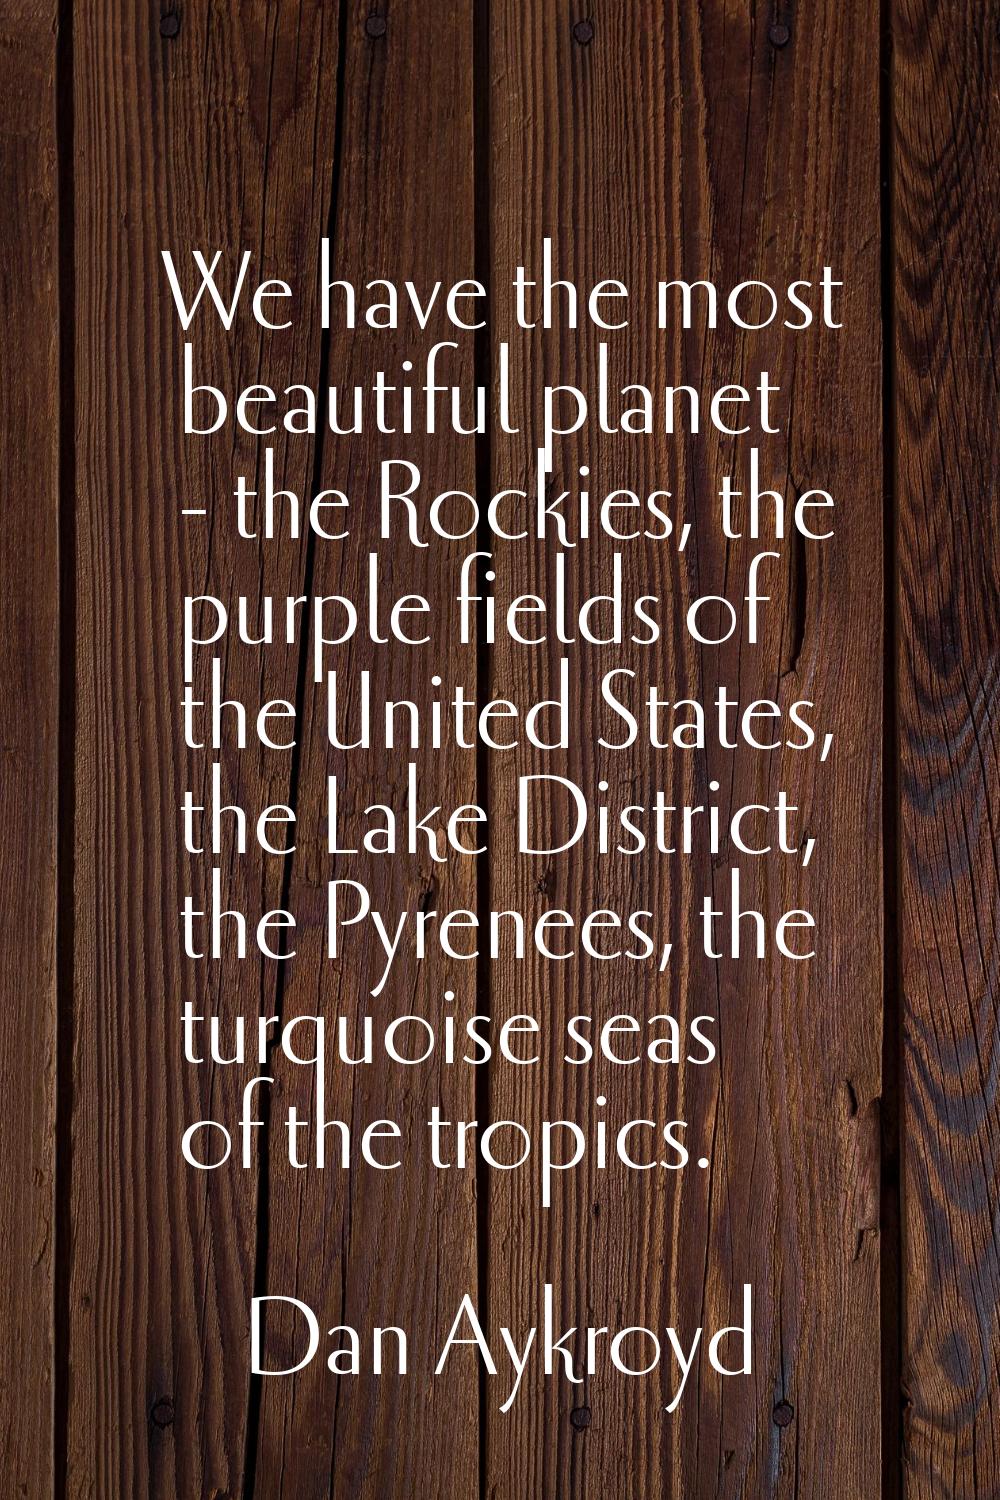 We have the most beautiful planet - the Rockies, the purple fields of the United States, the Lake D